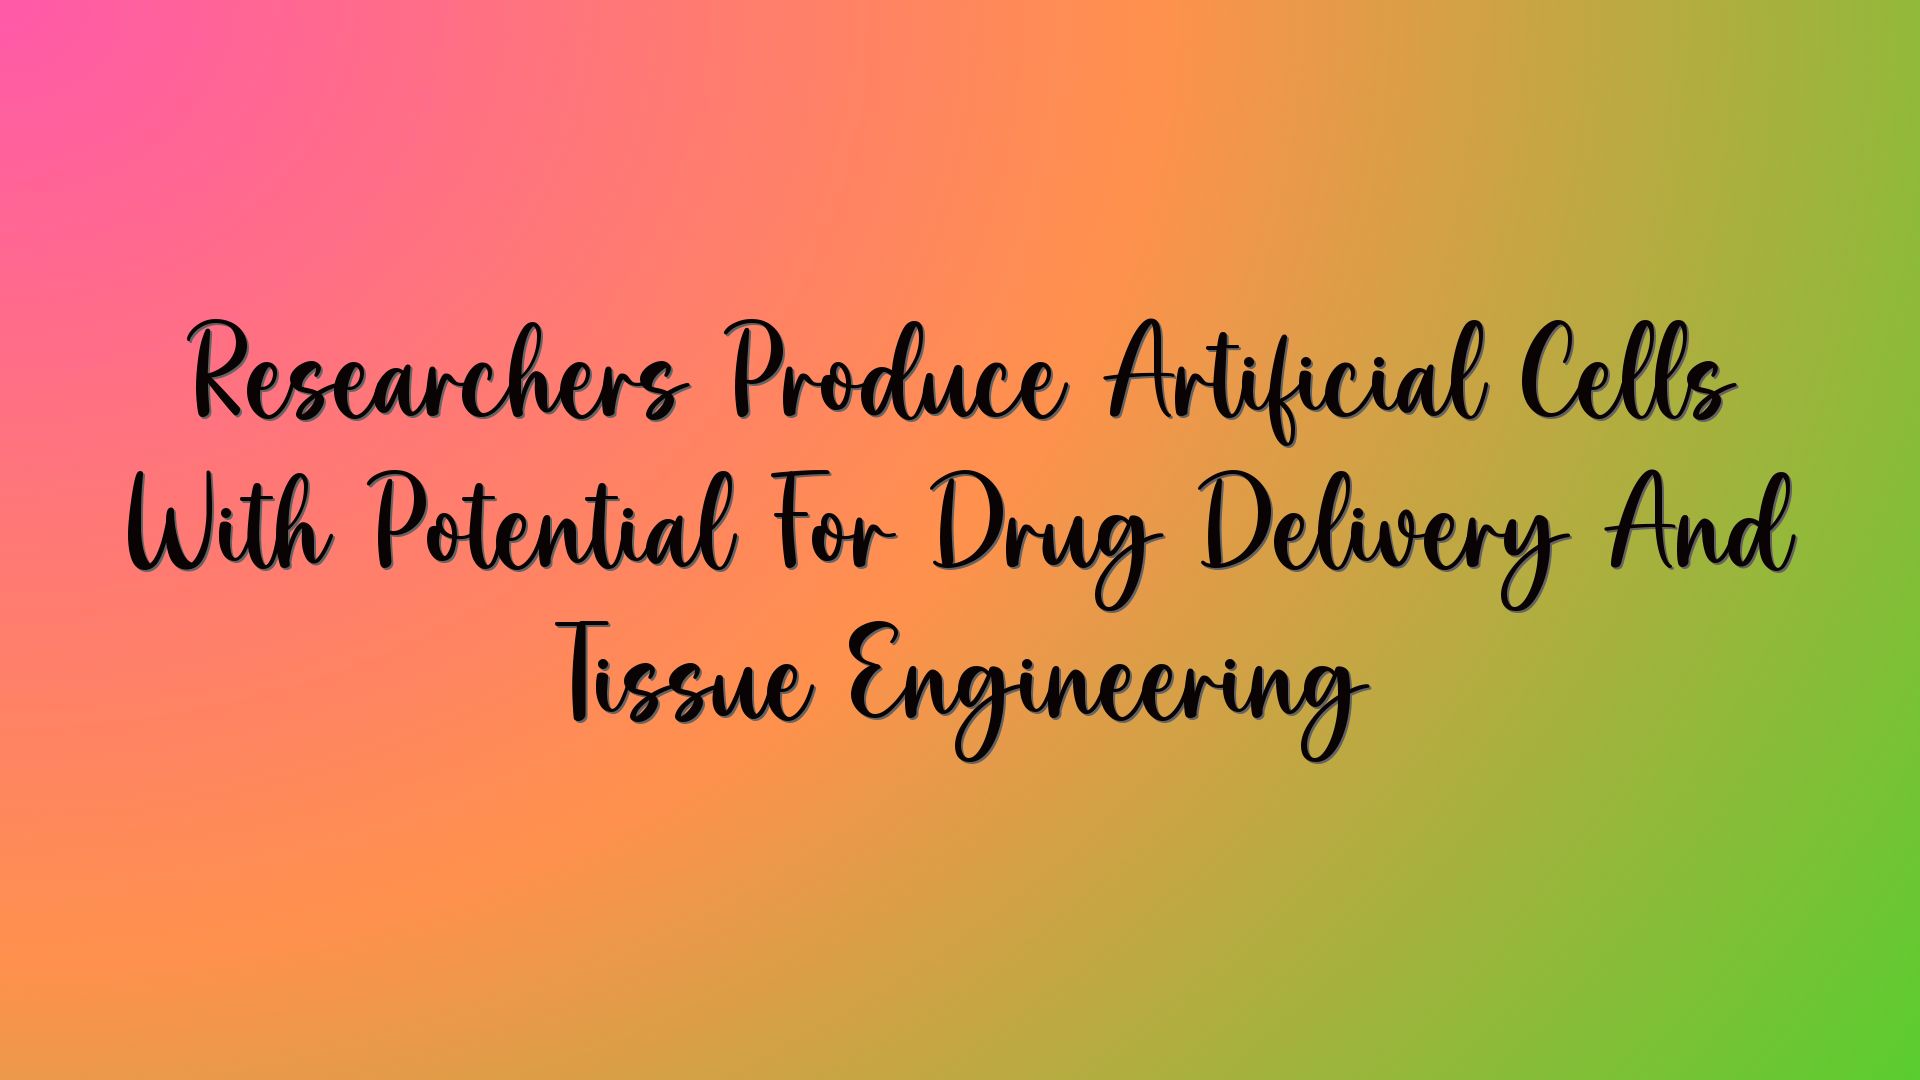 Researchers Produce Artificial Cells With Potential For Drug Delivery And Tissue Engineering